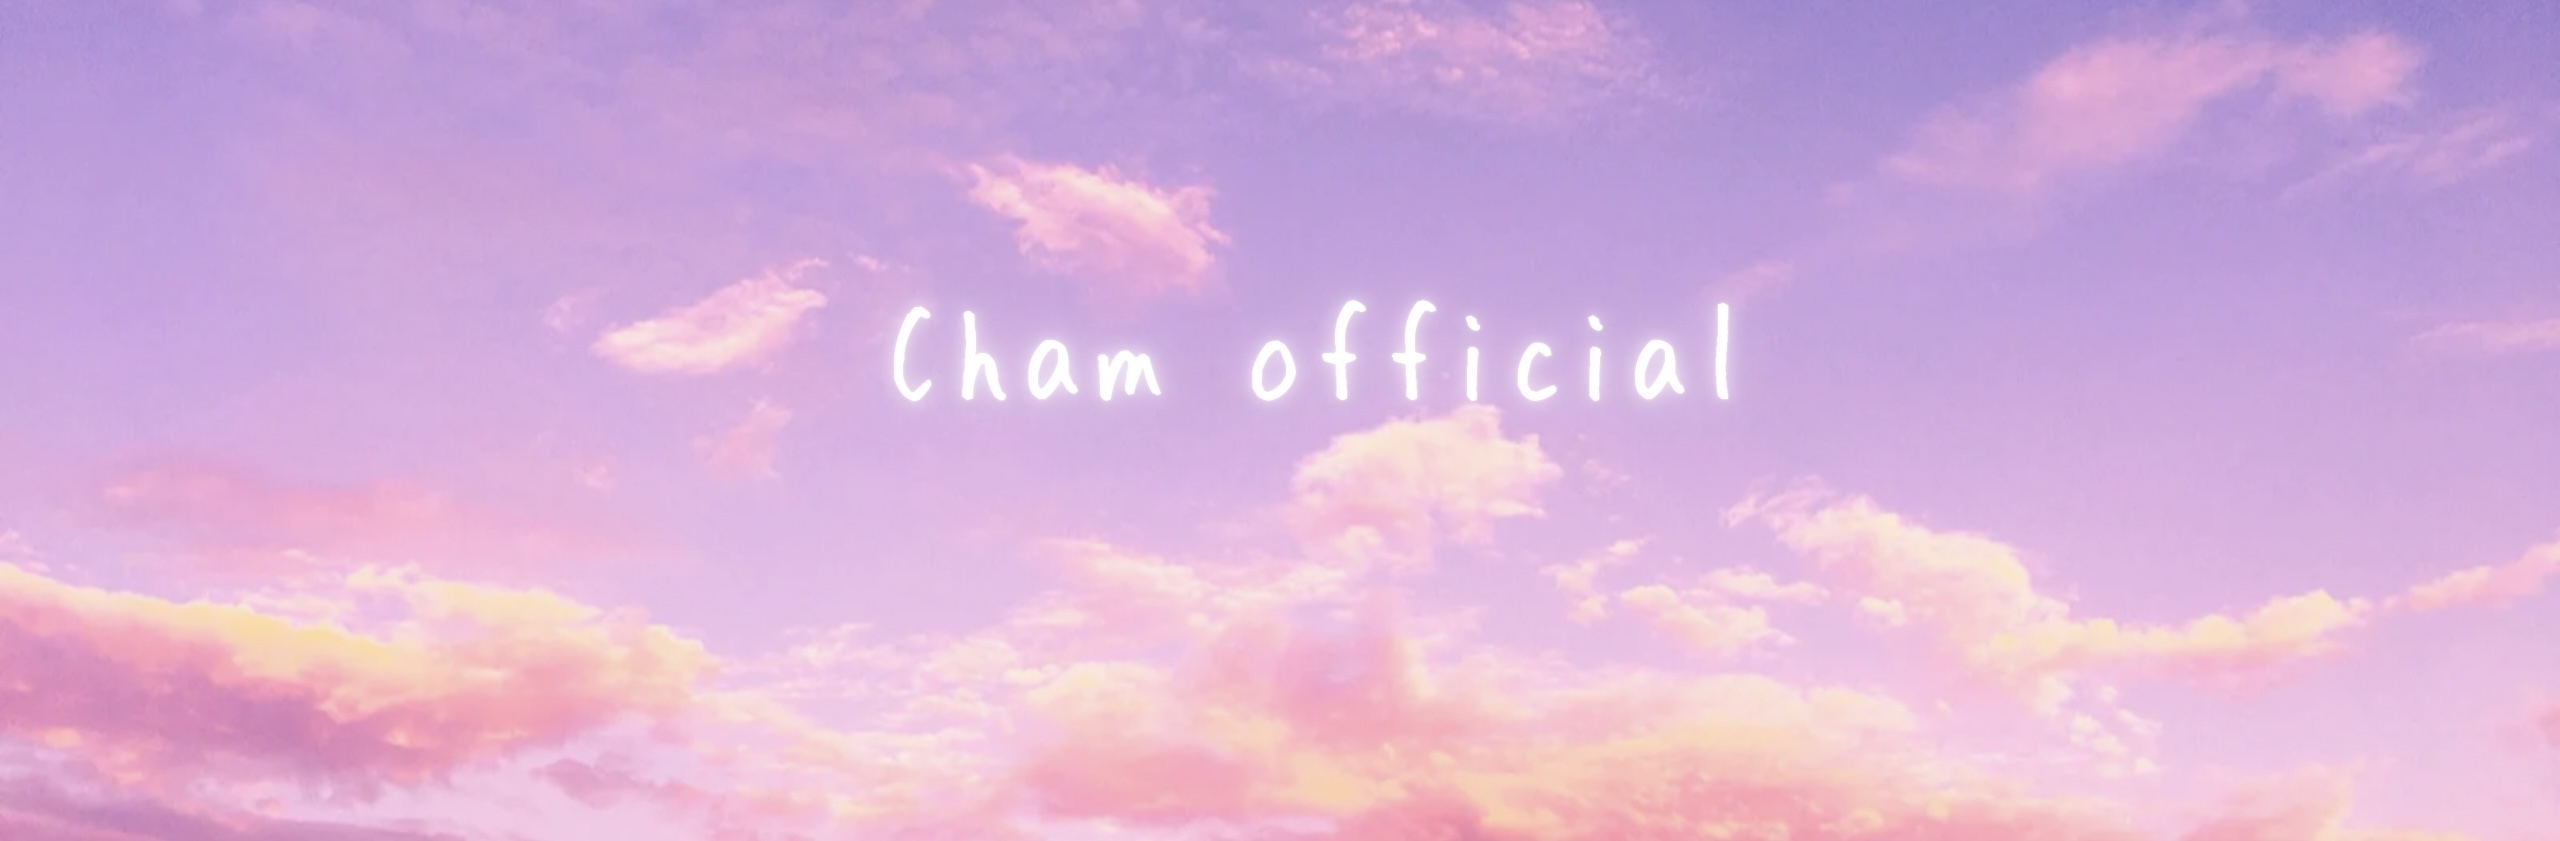 cham-official